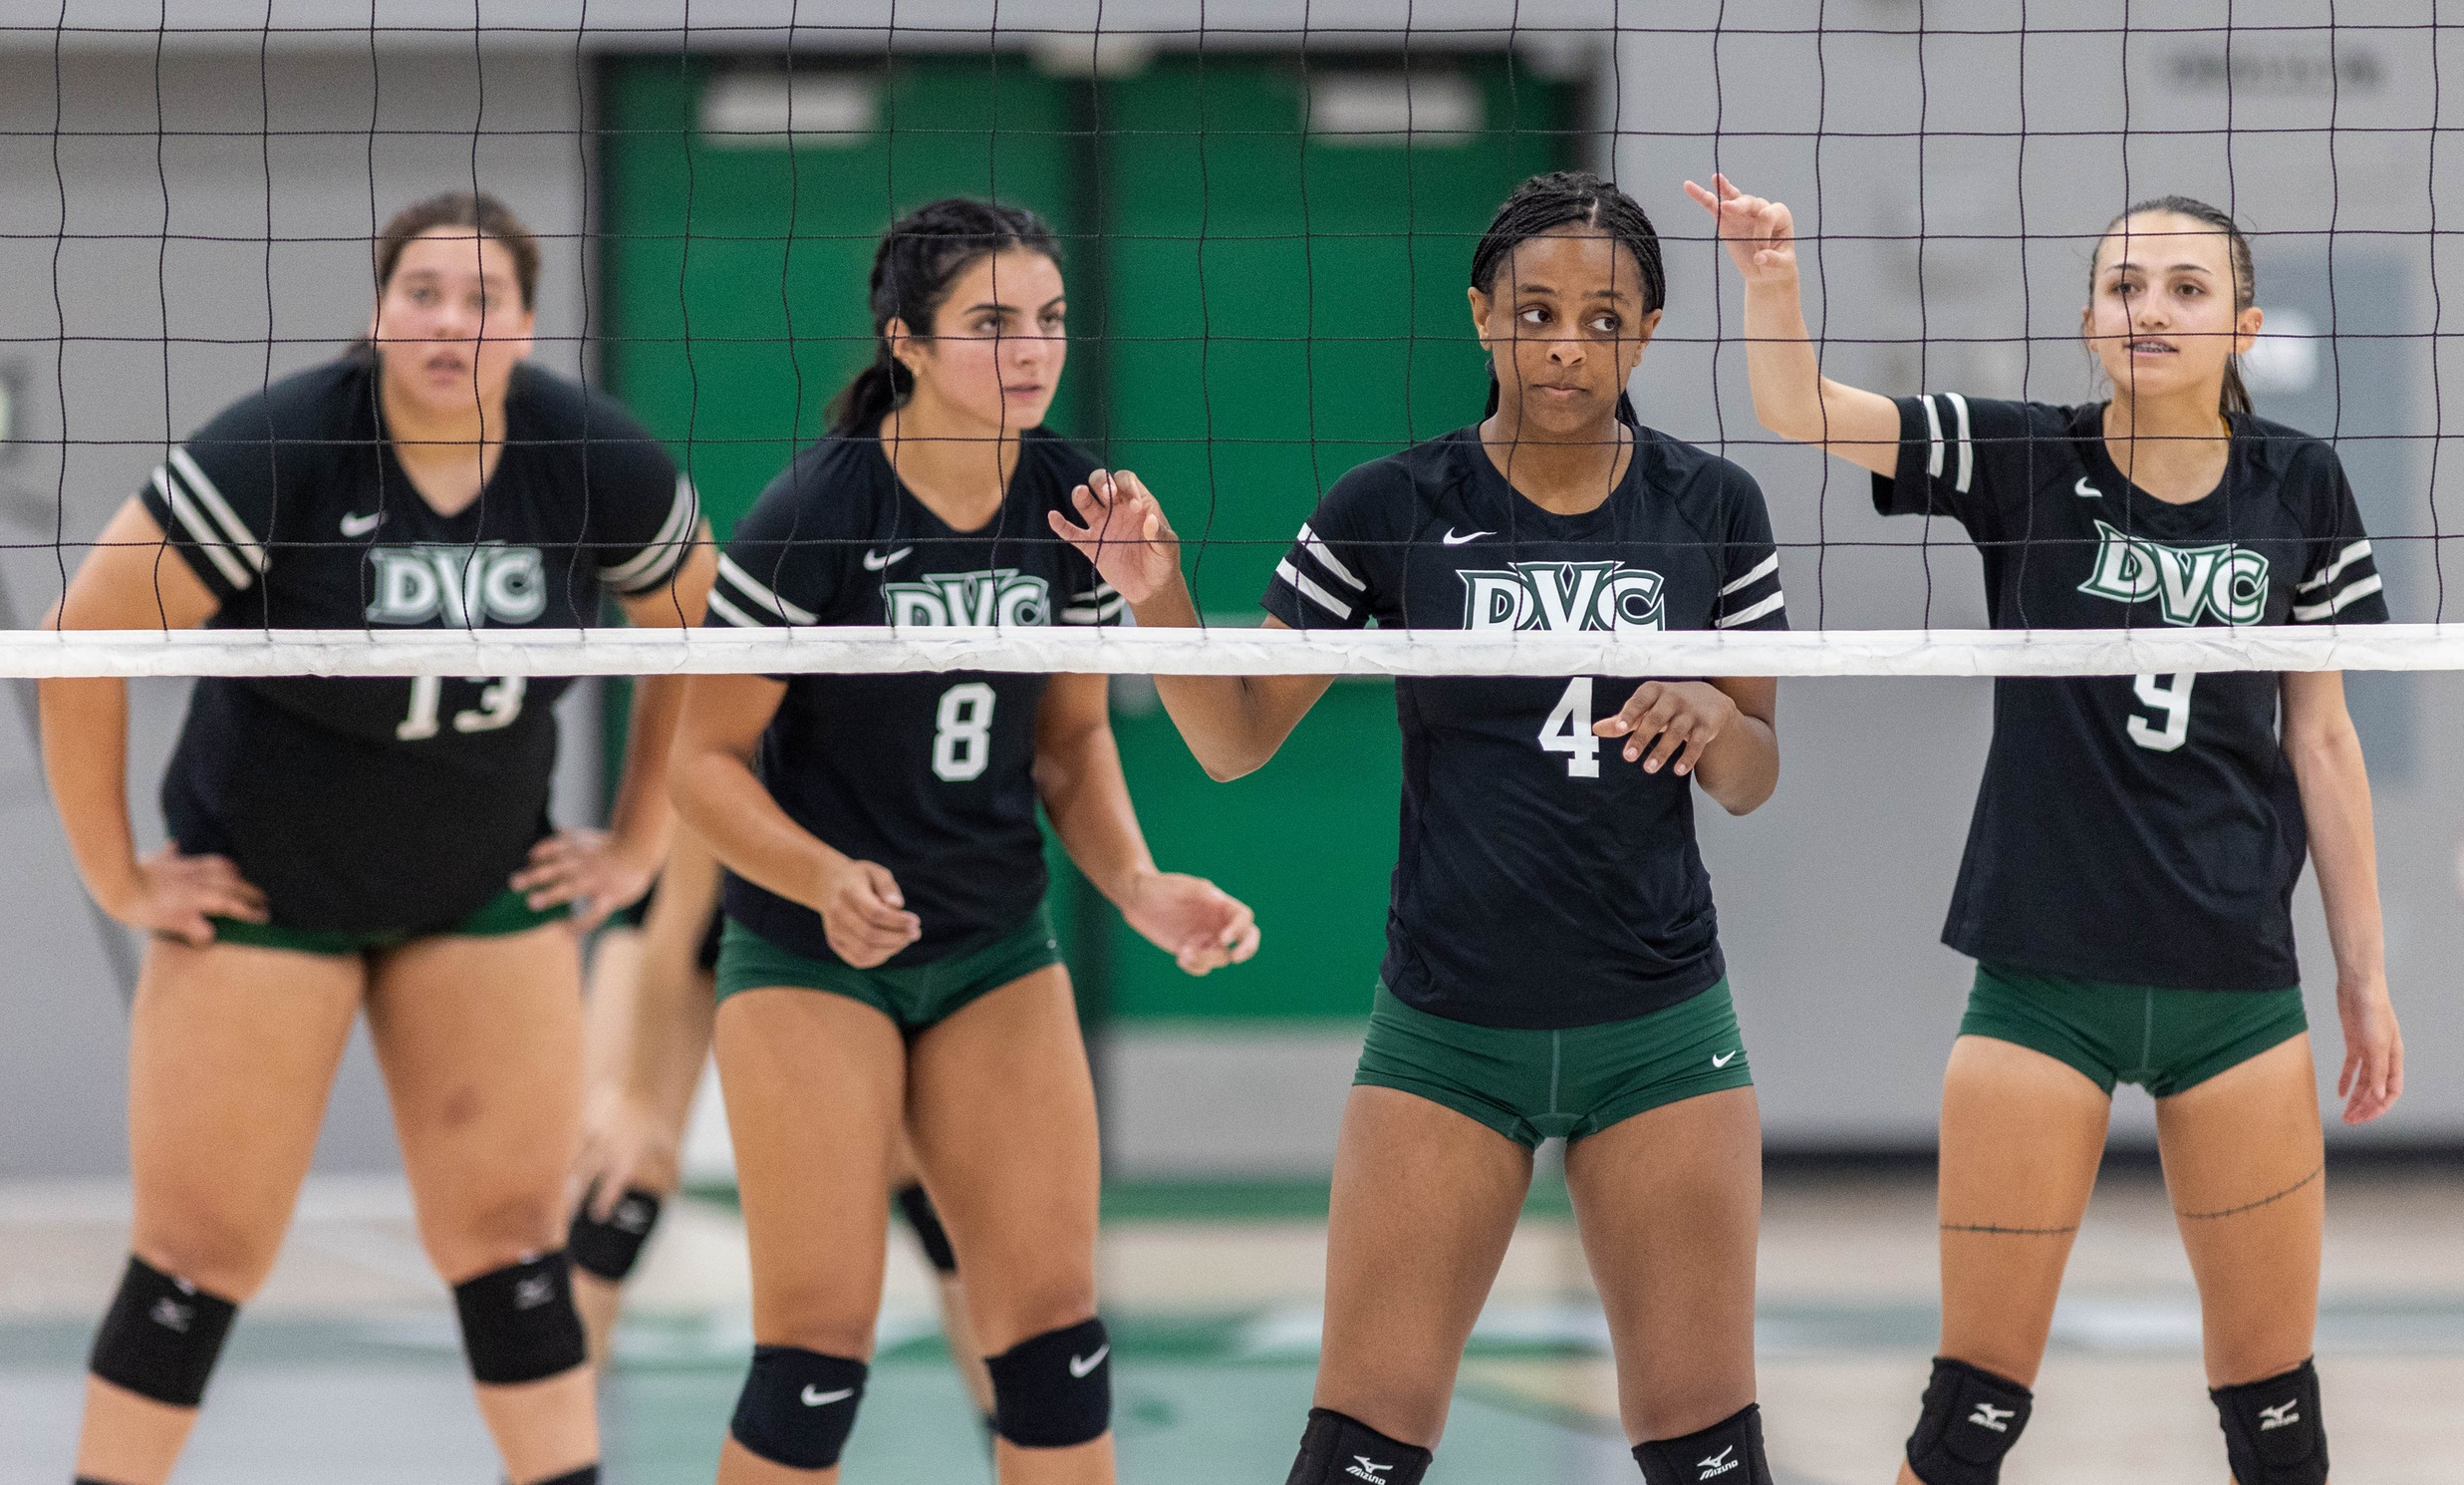 Women's Volleyball finish season with L to CRC, 4-19 overall